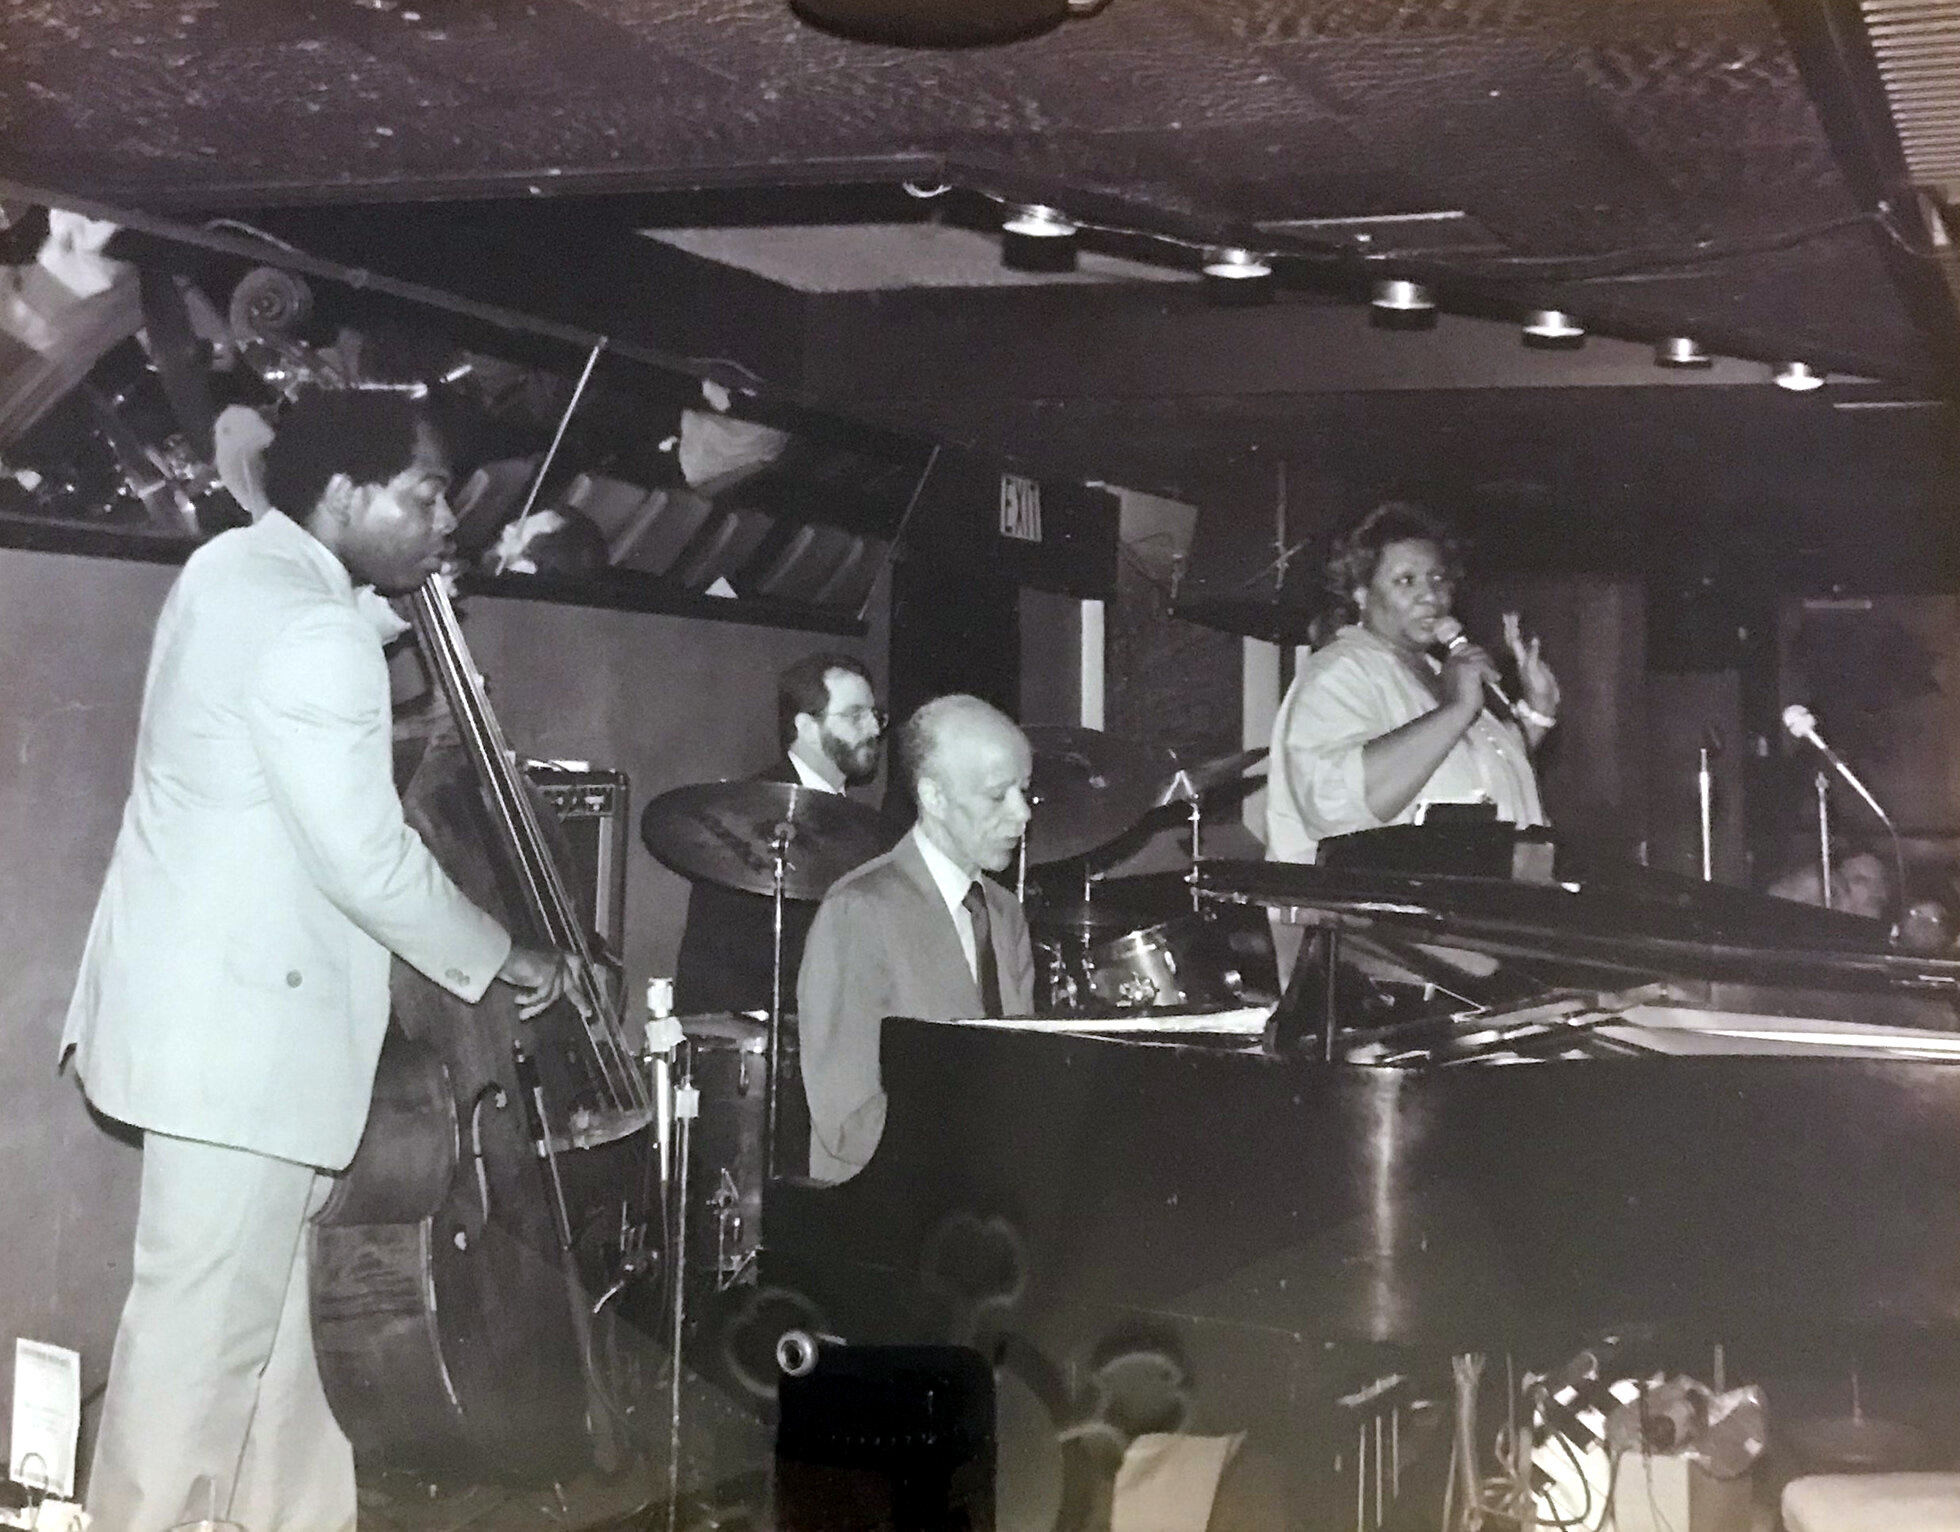 Baker's Keyboard Lounge - 1983 - with Don Mayberry, Earl Van Riper and Ange Smith